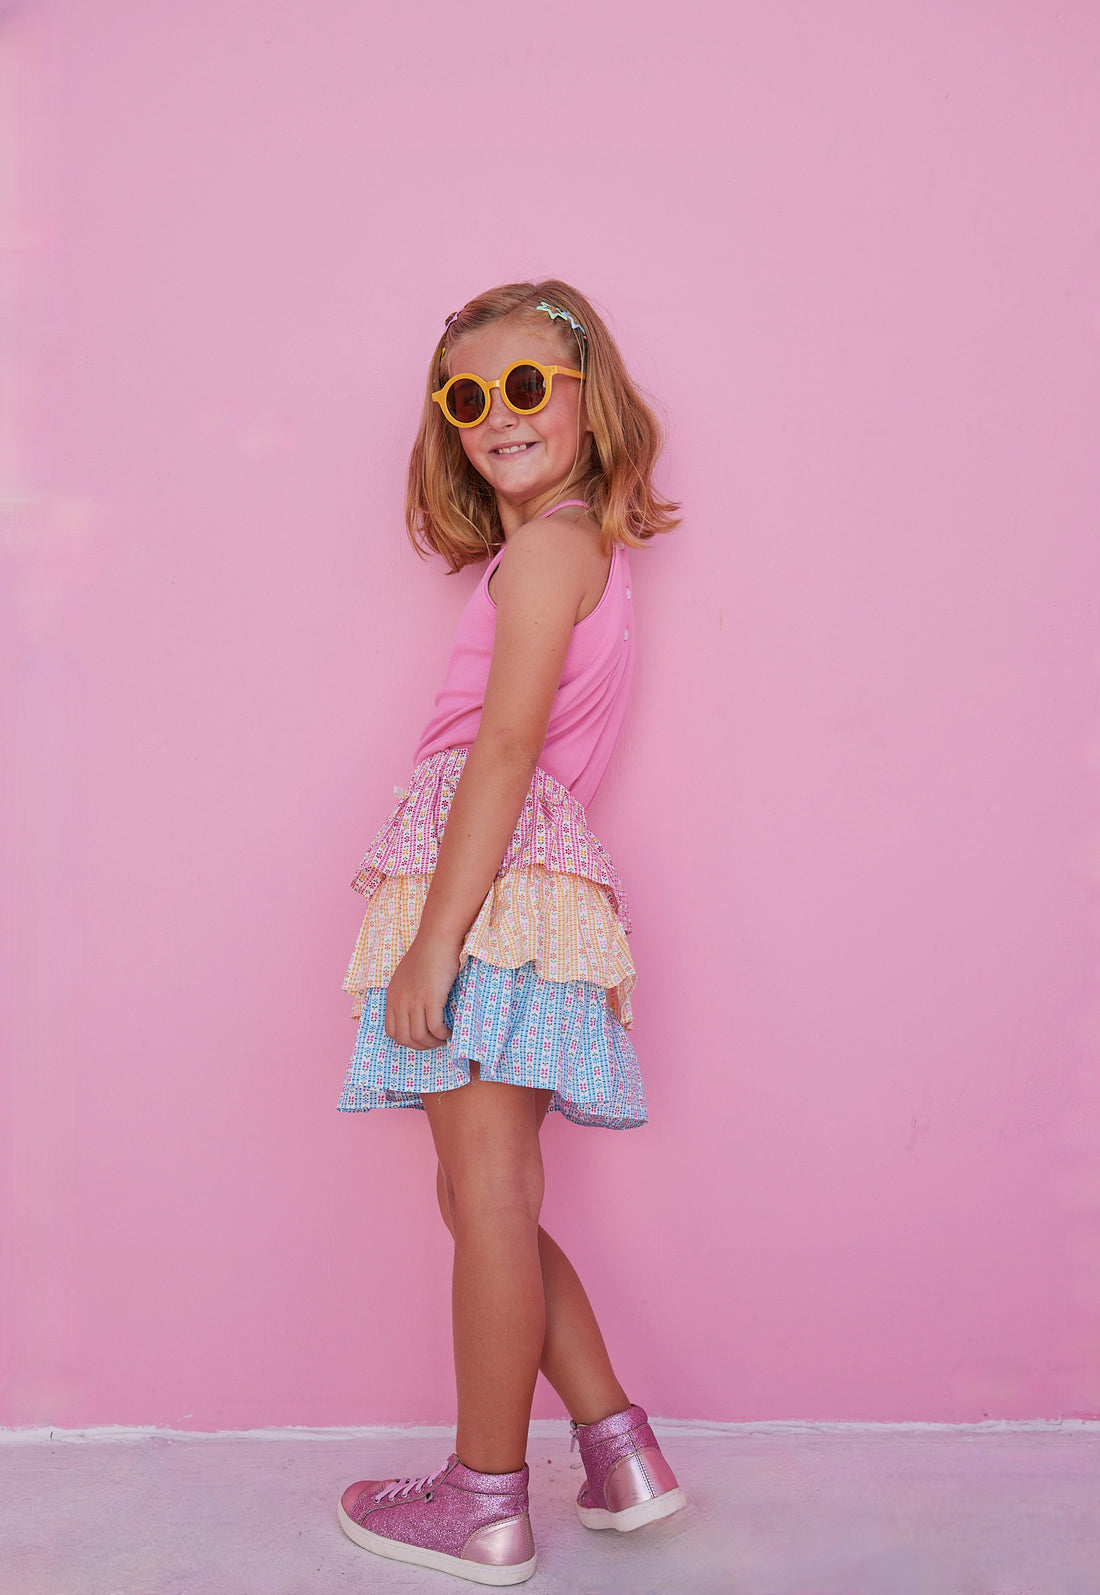 BISBY girl in our Tiered Mini Skort in our "Daisy Chain" with top tier in pink, middle tier in orange, and bottom tier in blue floral pattern. Skort has built in shorts and has elastic waistband. Paired perfectly with our Hot pink halter top  